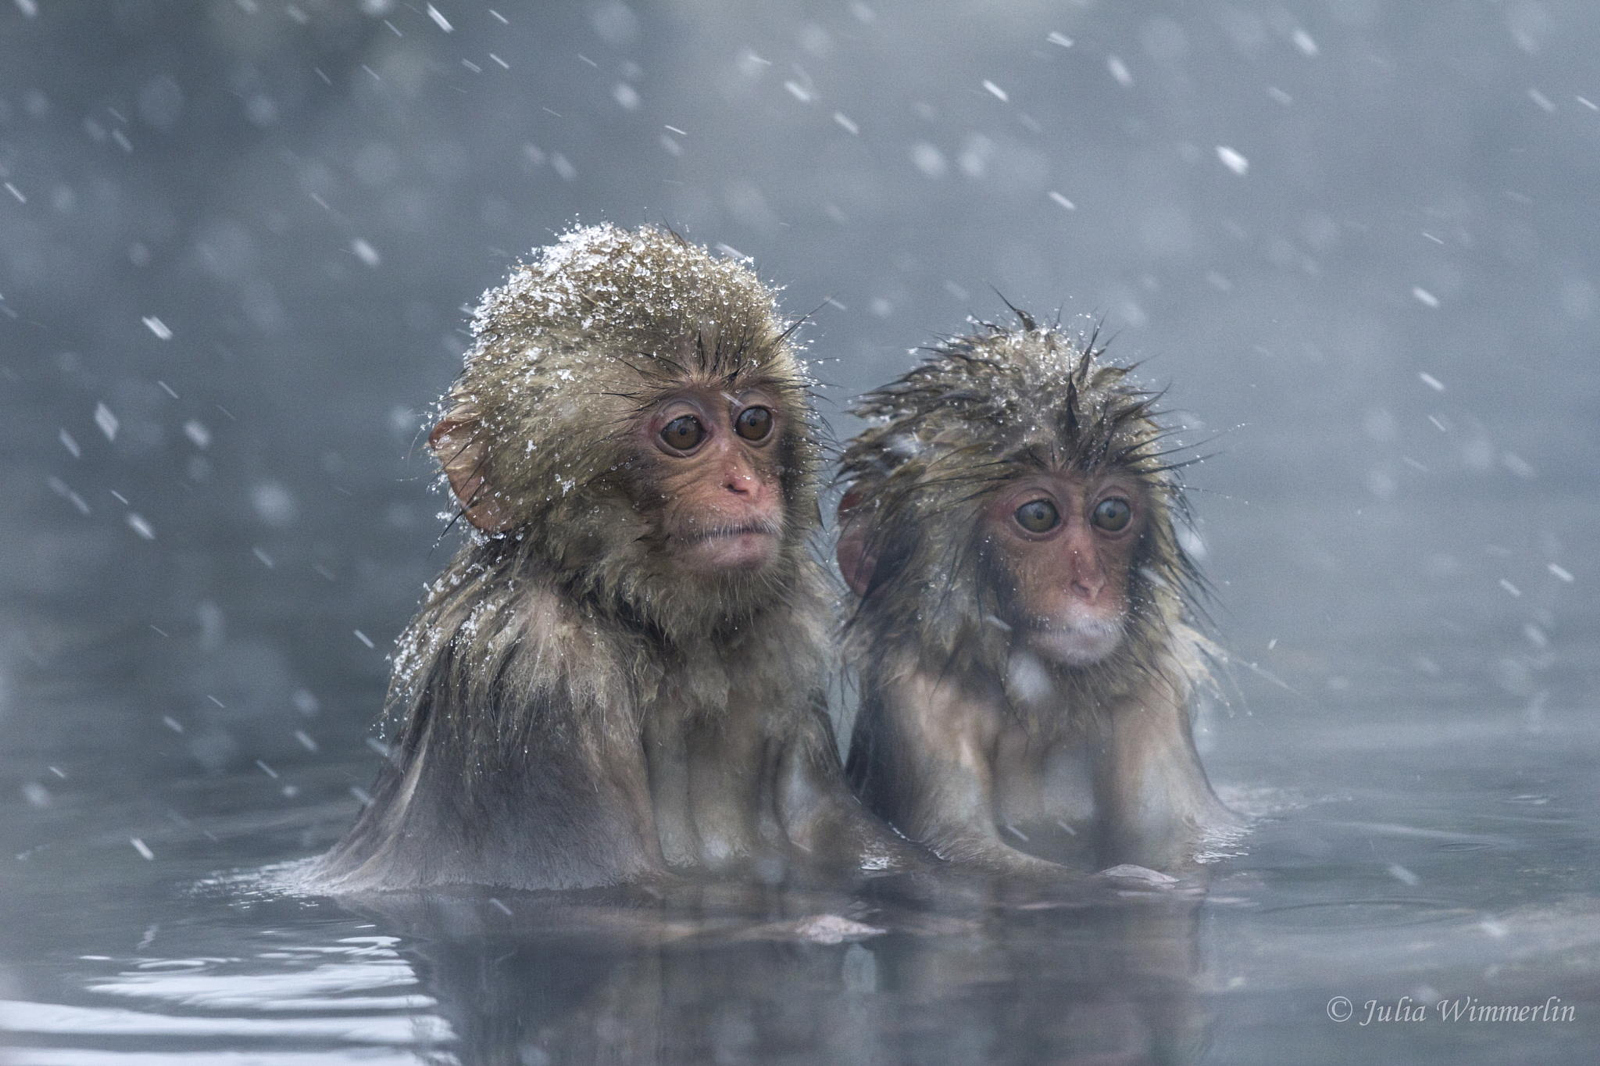 15 Reasons You Should Go Visit the Japanese Snow Monkeys